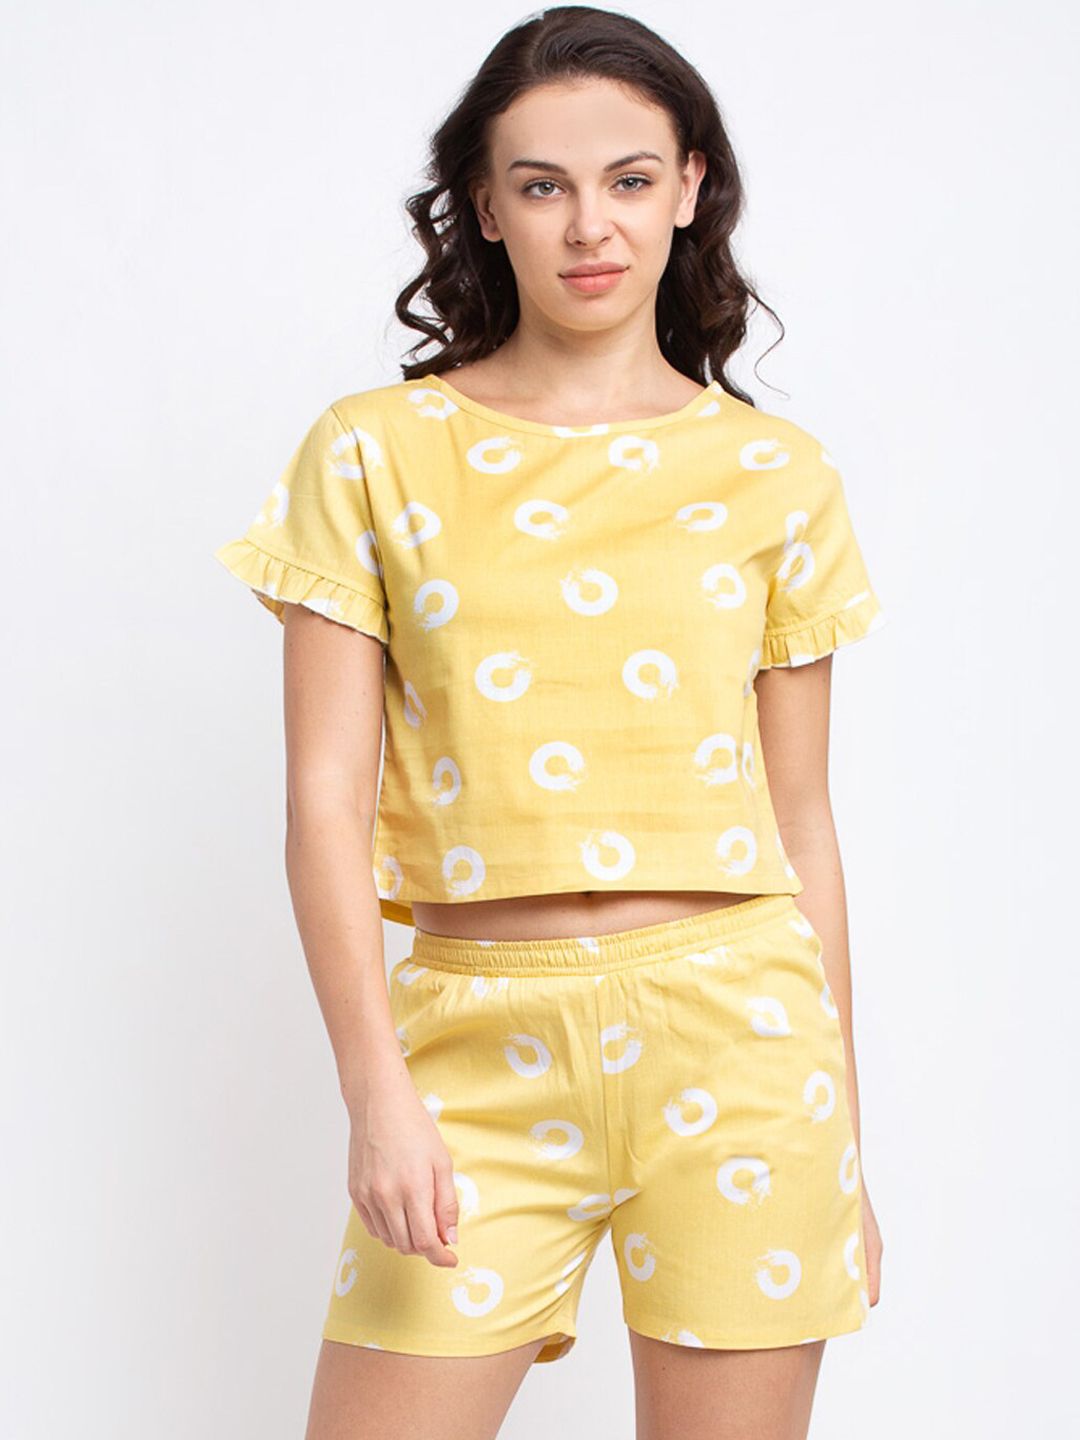 Claura Women Yellow Cotton Shorts and Top Loungewear Set Price in India